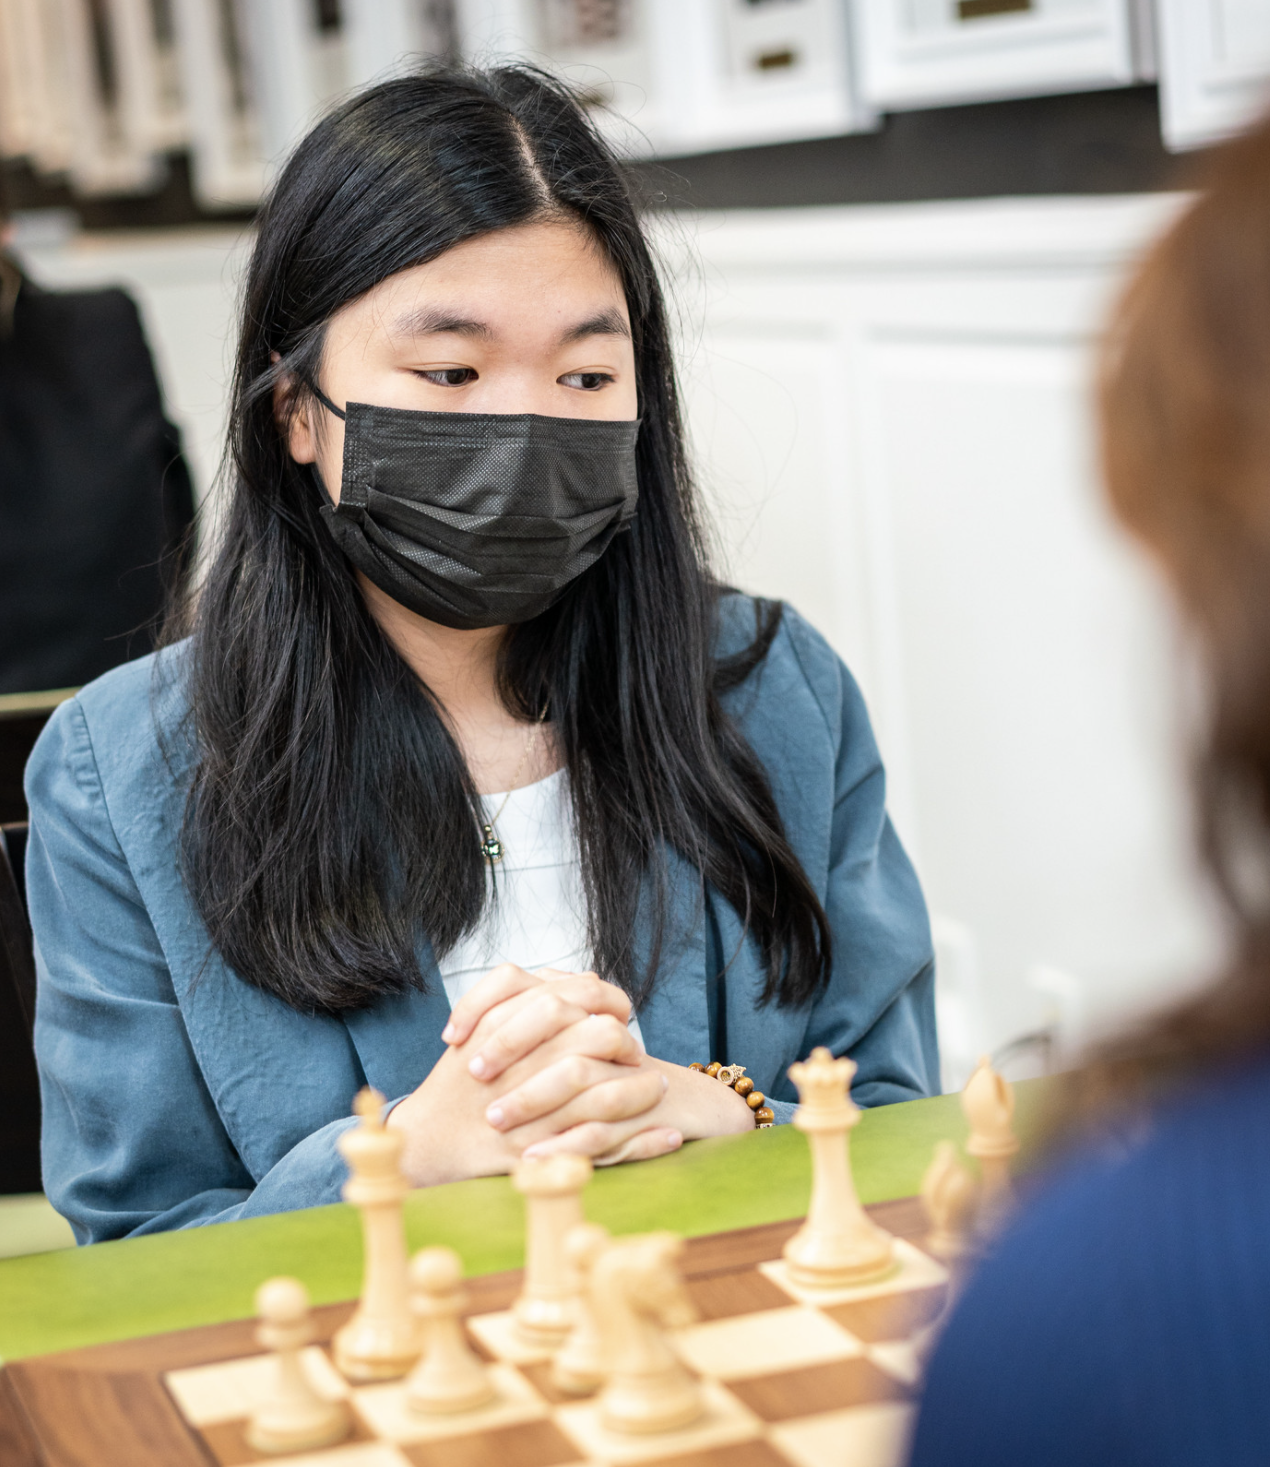 Five Americans Advance in FIDE World Cup, Yip to Women's Round of